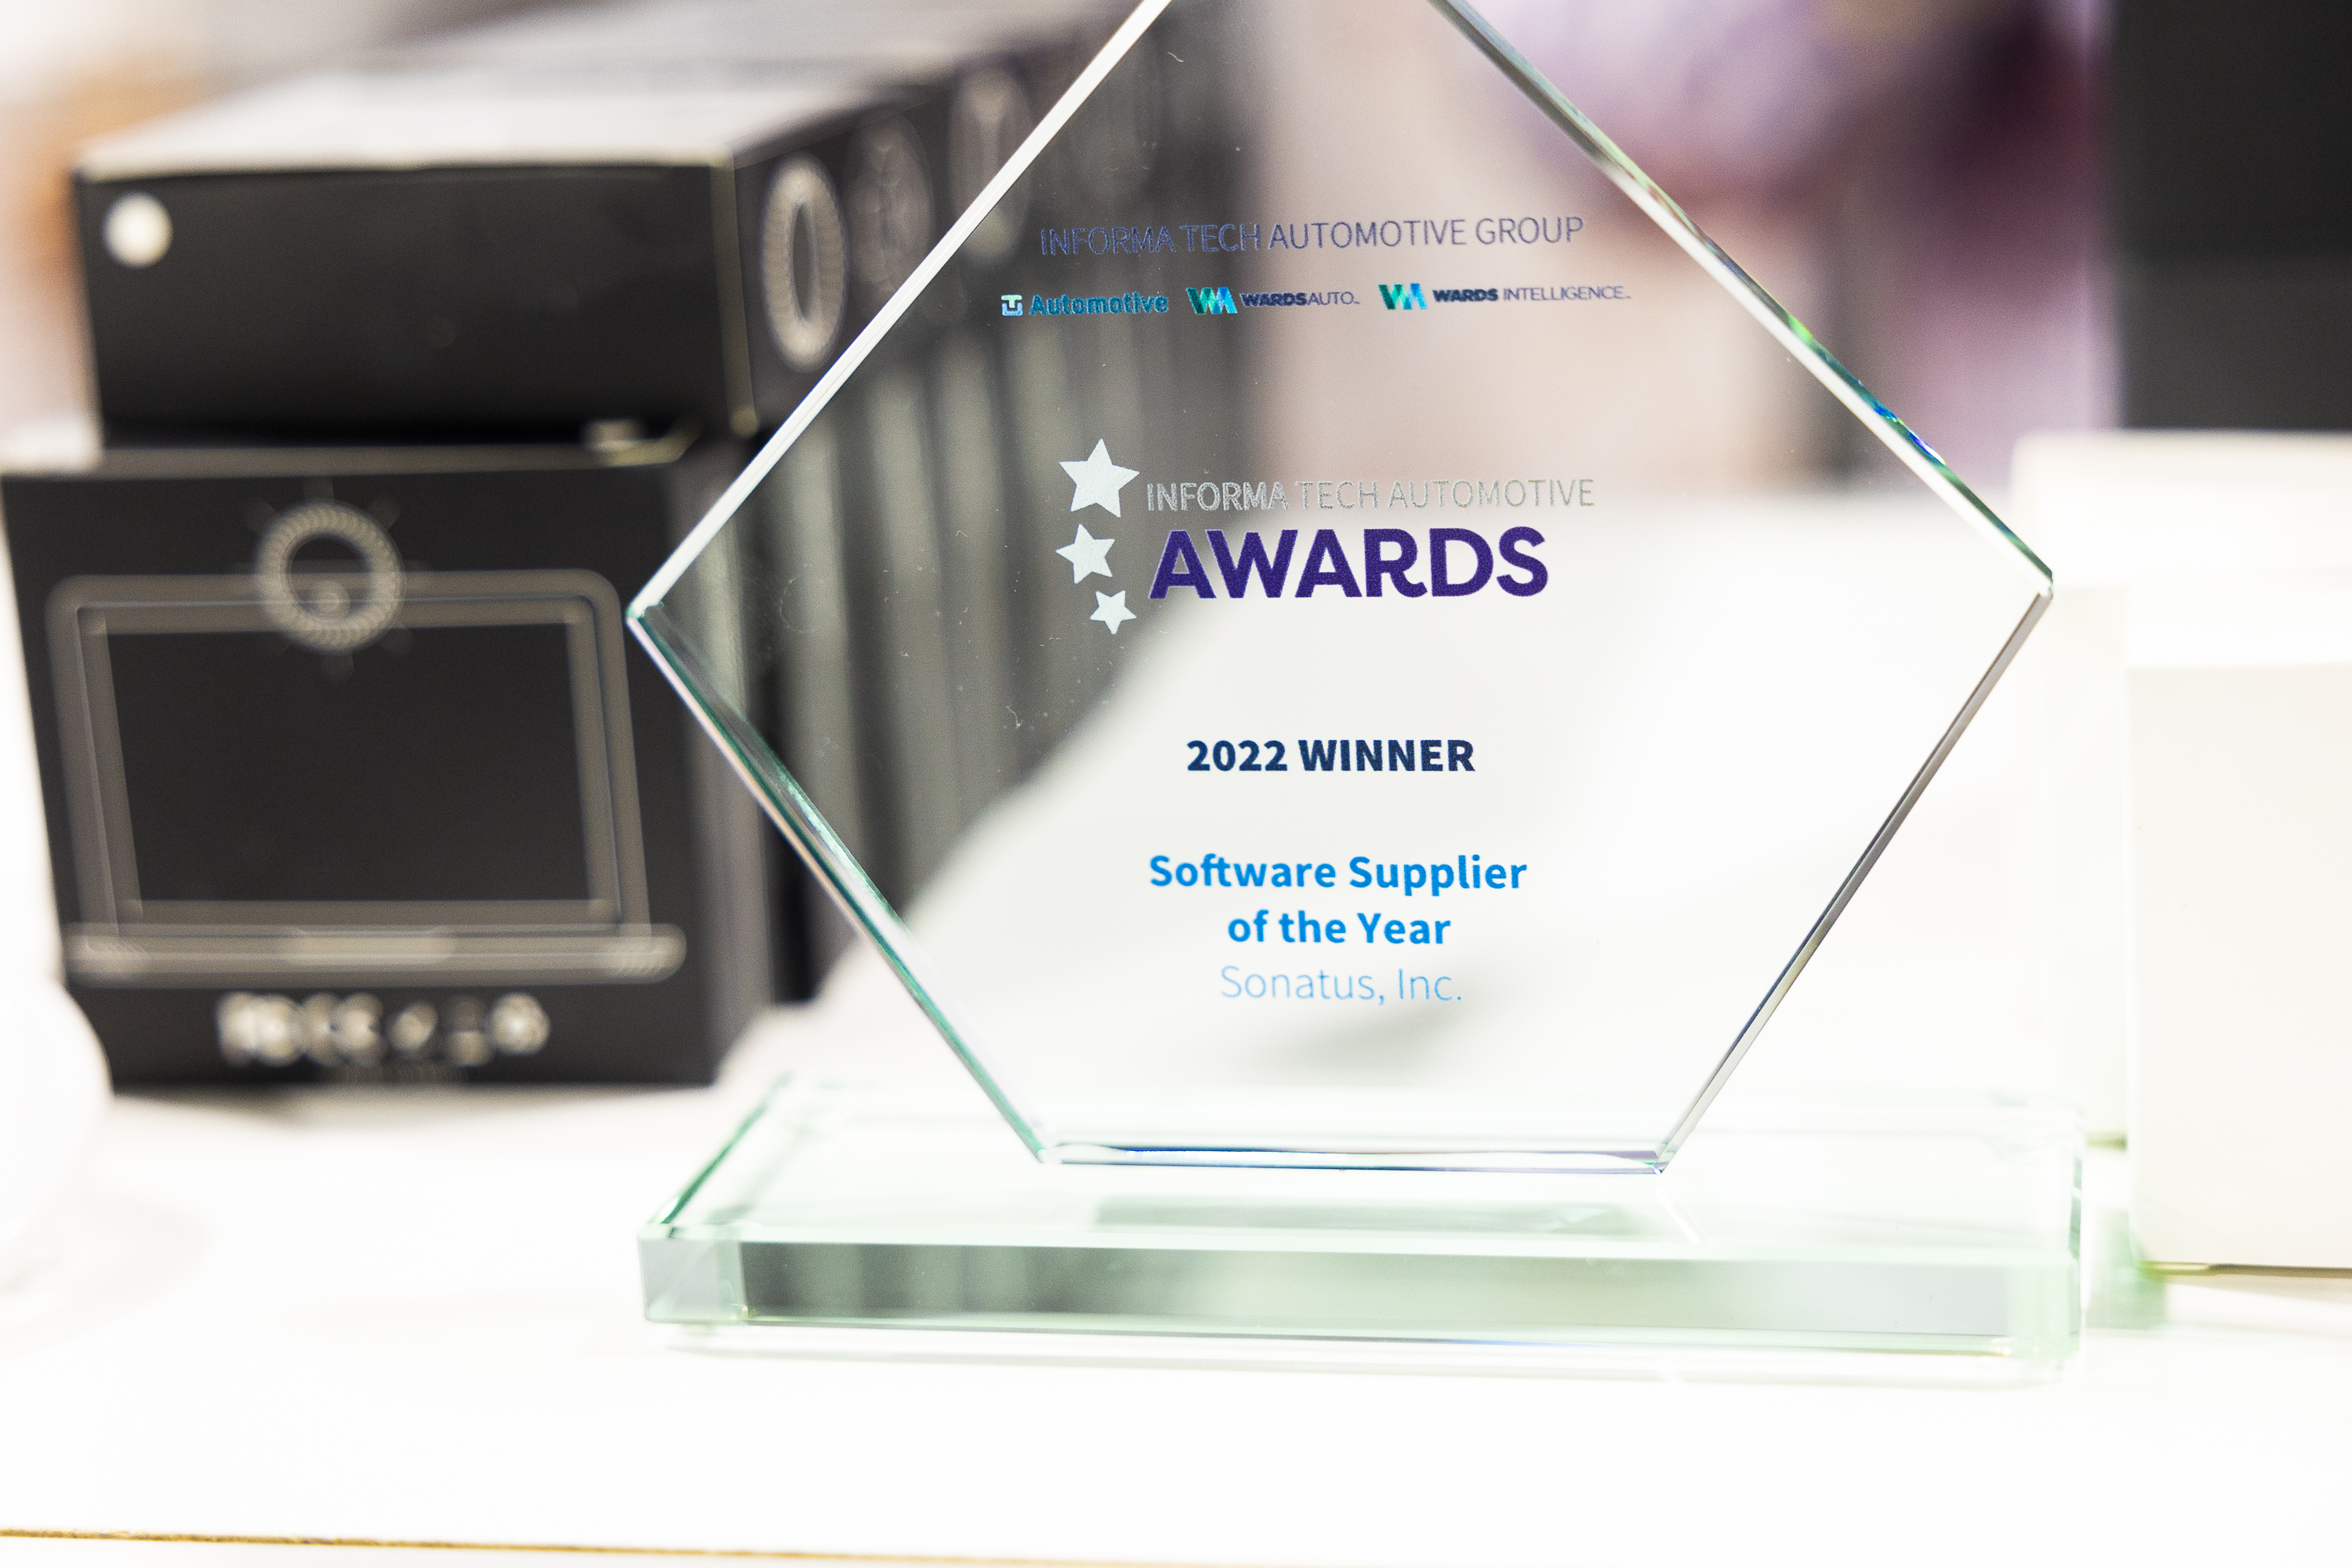 Sonatus Takes Home Informa Tech Automotive Software Supplier of the Year Award